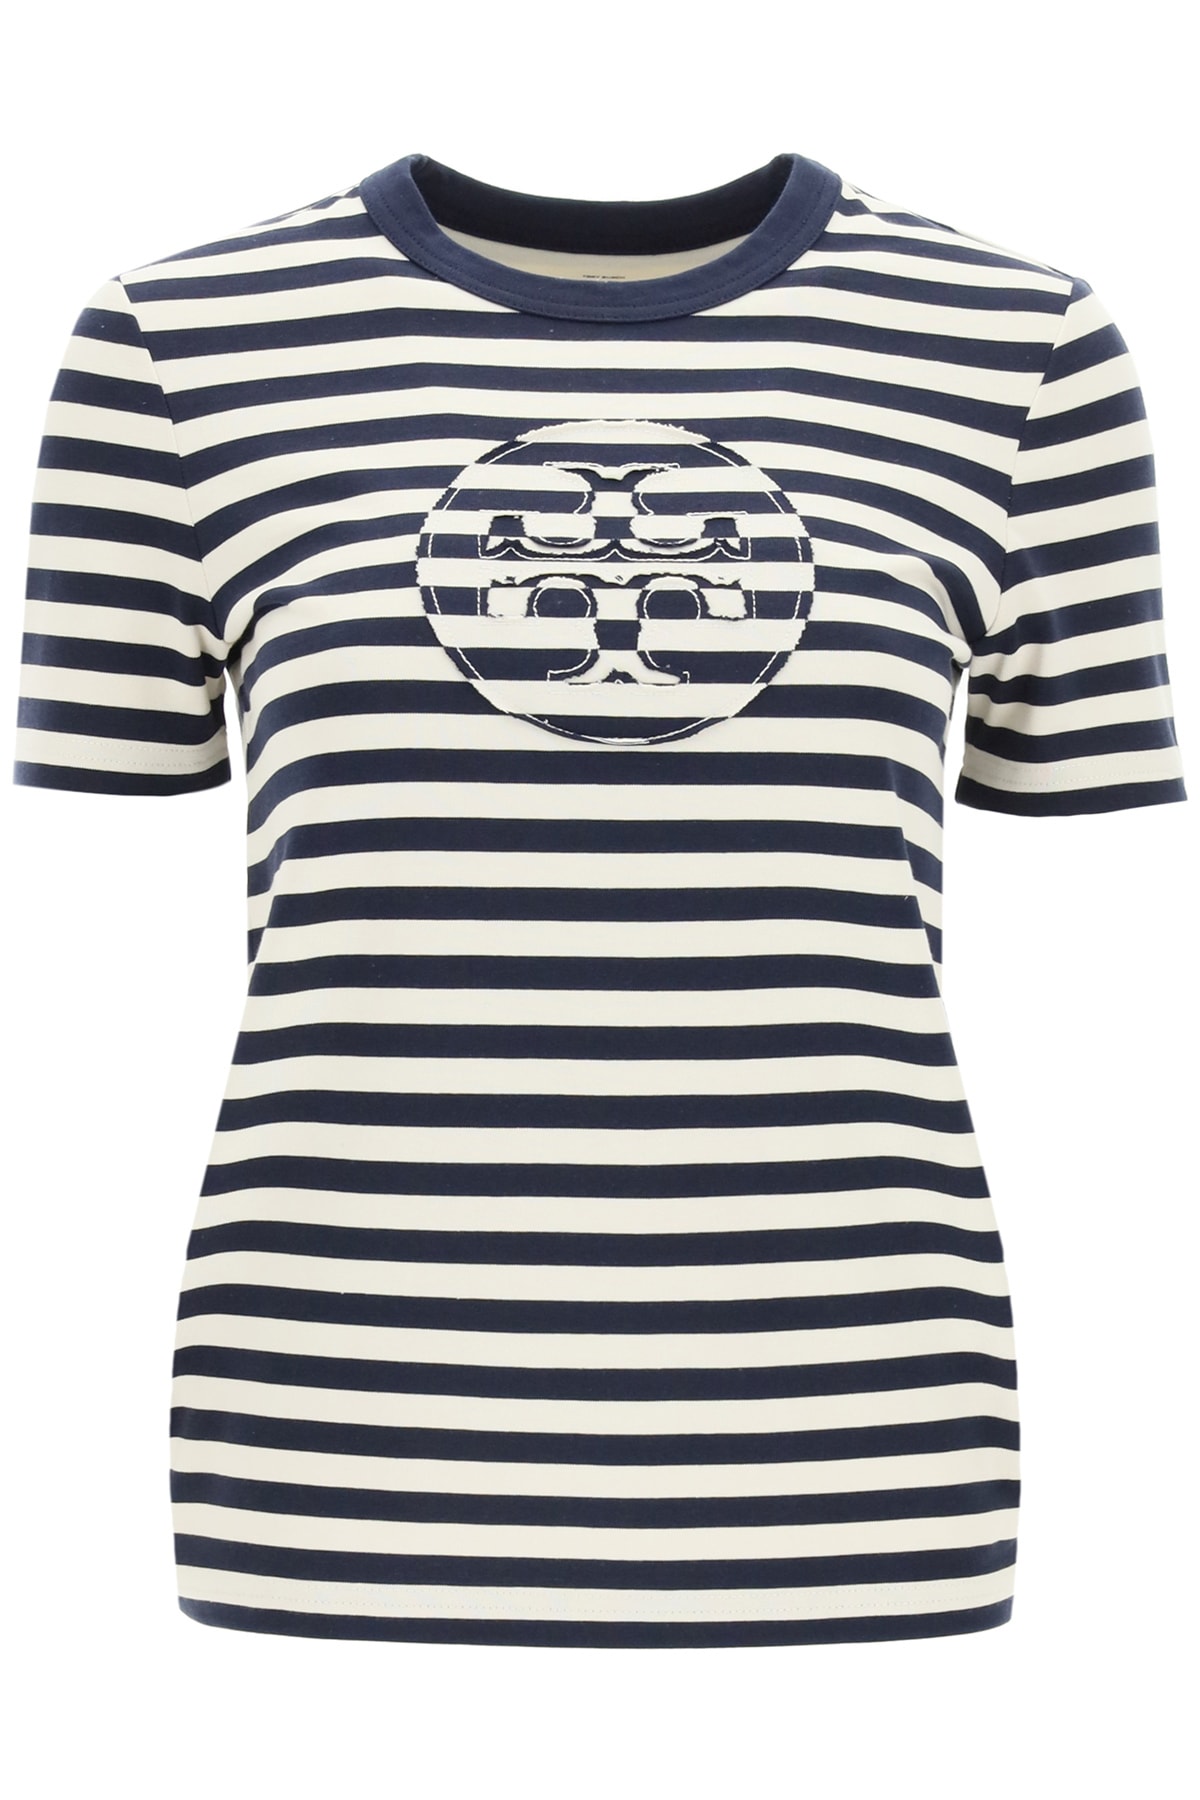 Tory Burch Striped T-shirt With Double T Application